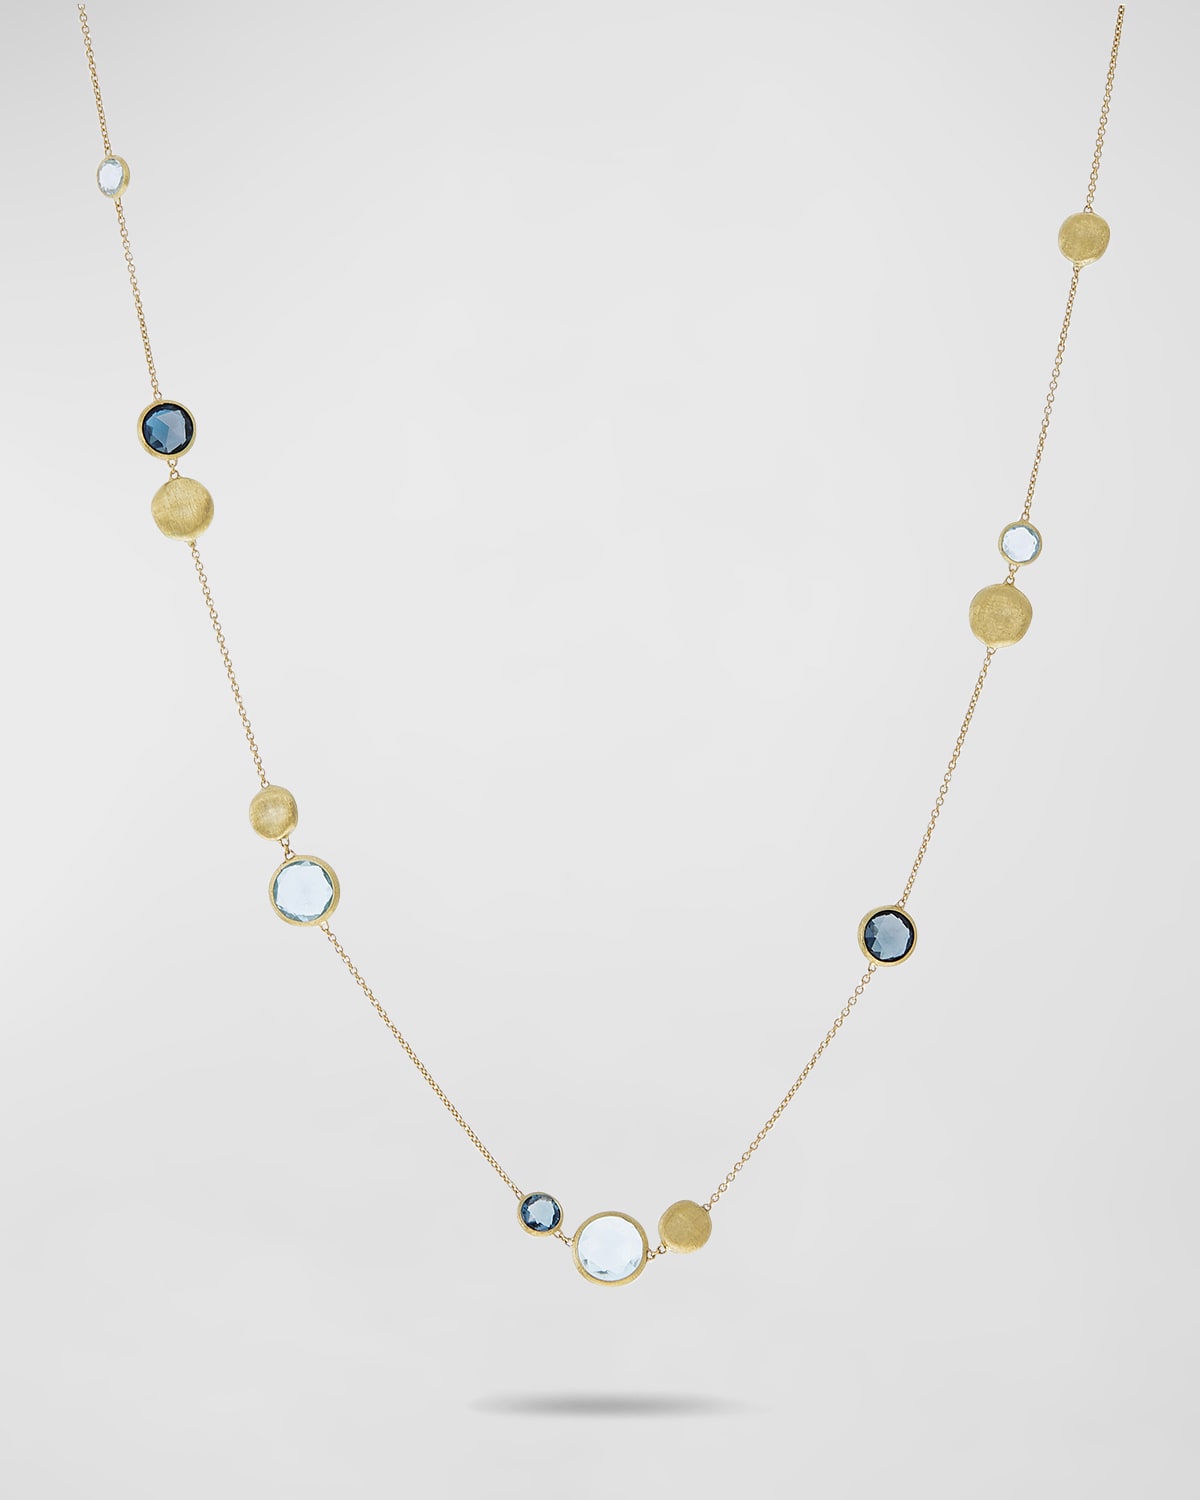 Marco Bicego Jaipur 18K Yellow Gold Mixed Blue Topaz Collar Necklace